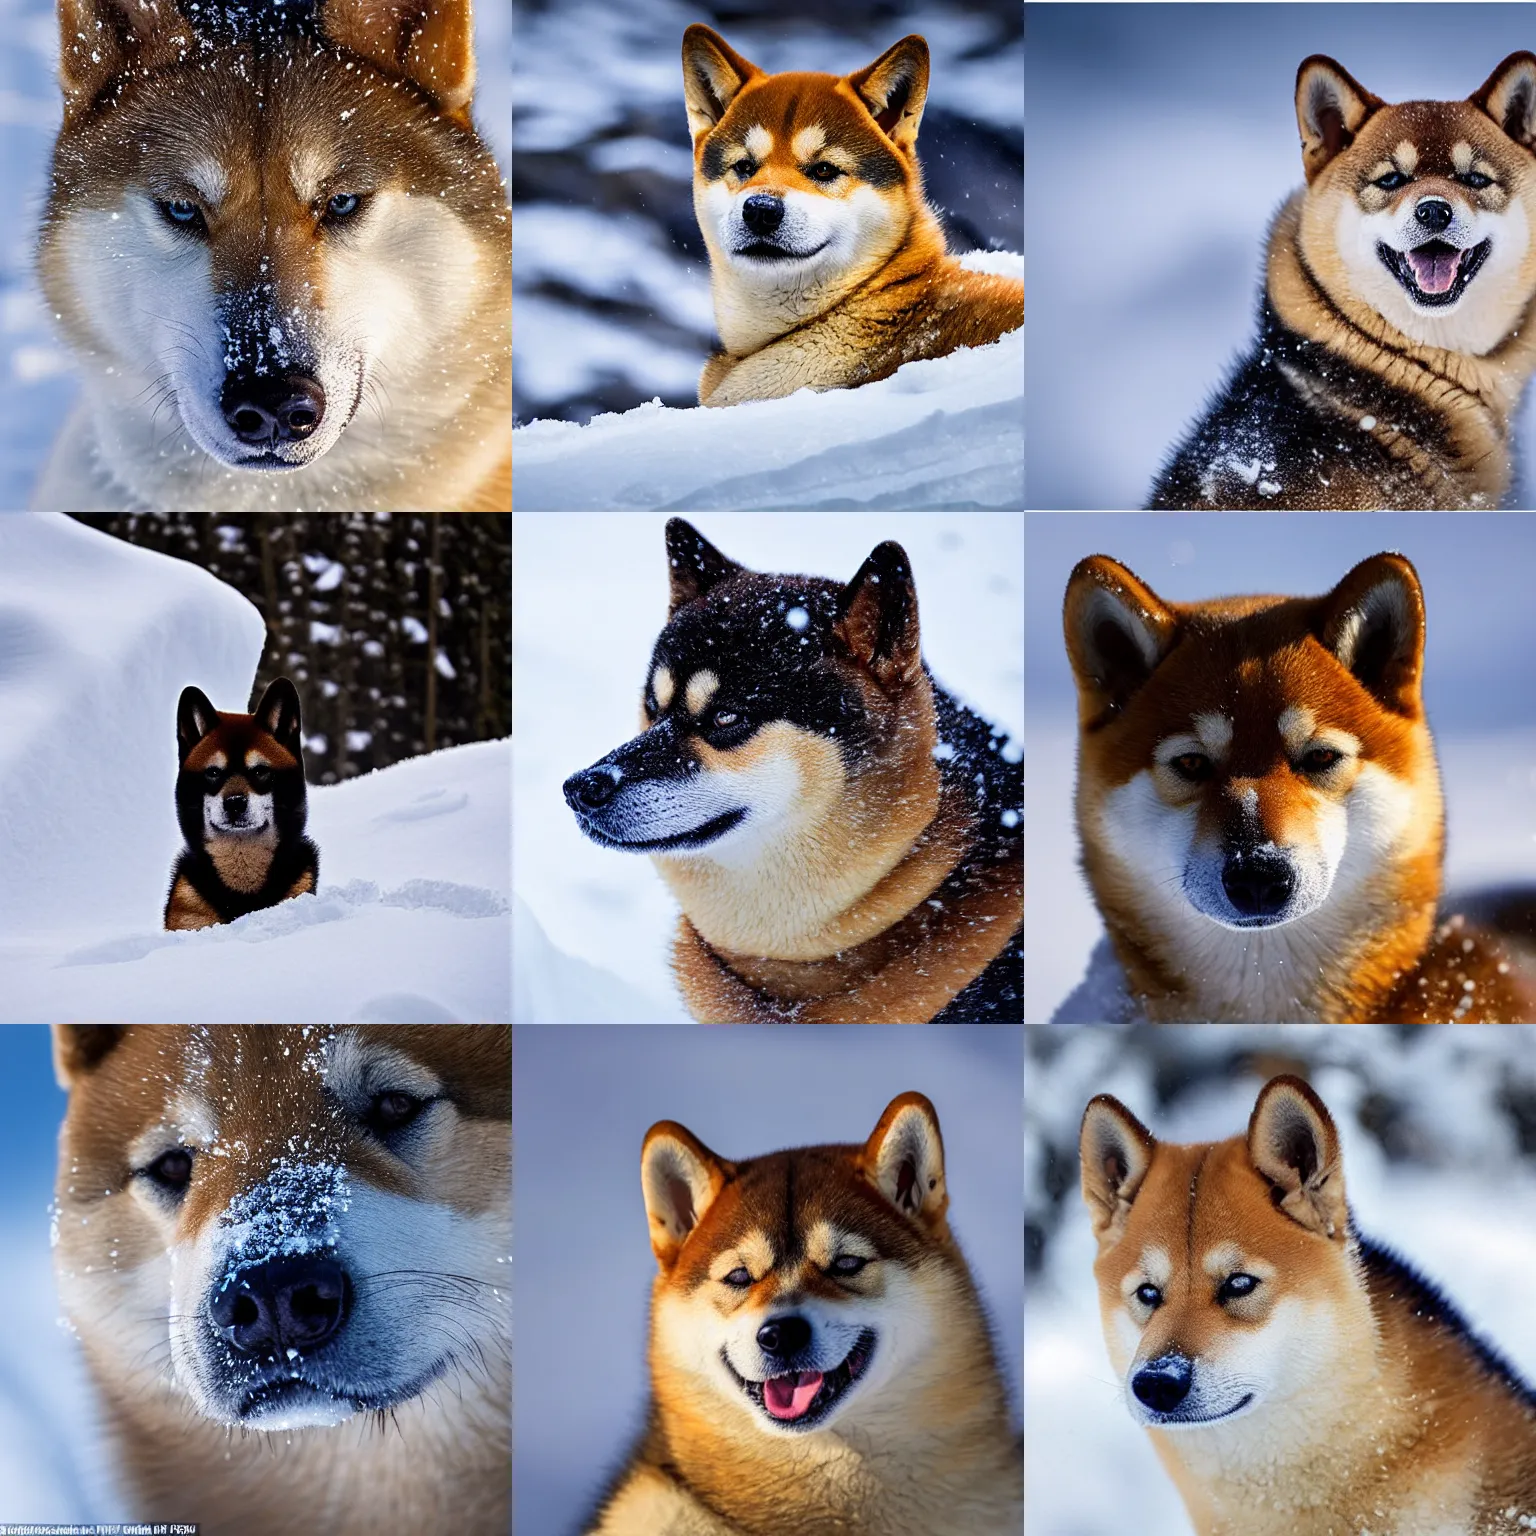 Prompt: award winning wildlife photography, shiba inu on a snowy mountain, close up of face, zoom in on face, surrounded by snow, wildlife photography by Paul Nicklen